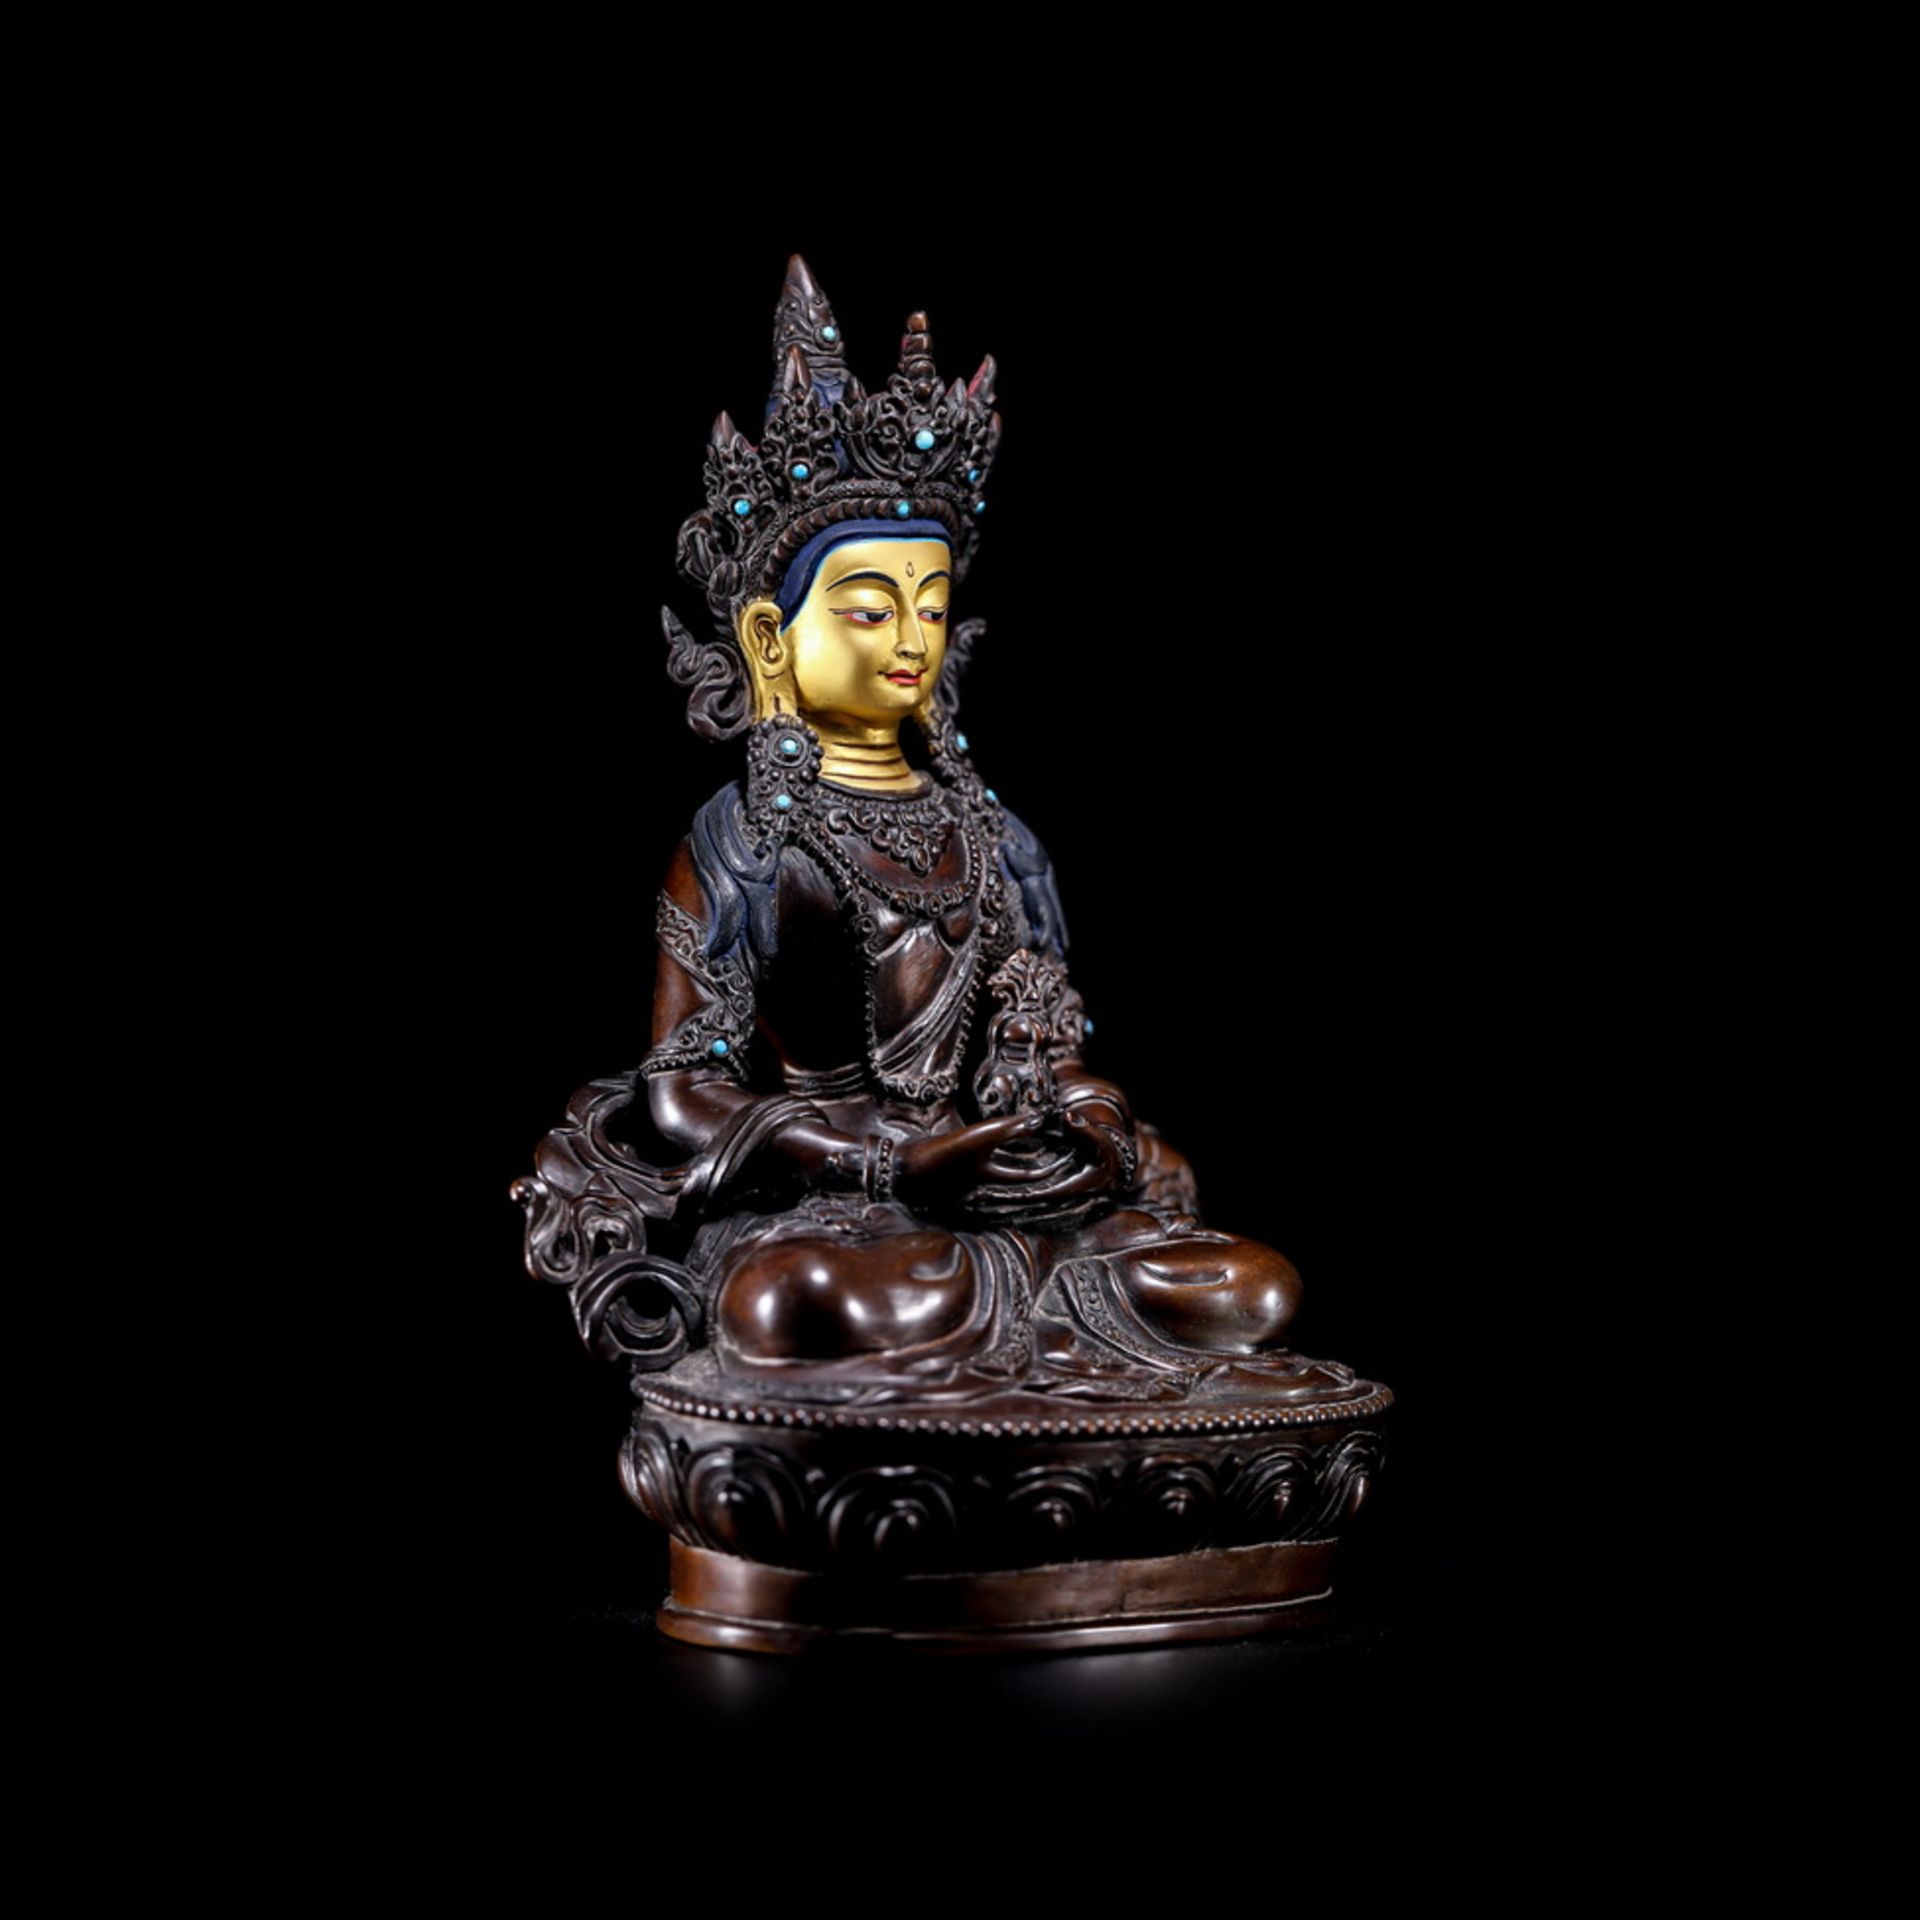 Red bronze clay gold painted longevity Buddha from Nepal - Image 3 of 11